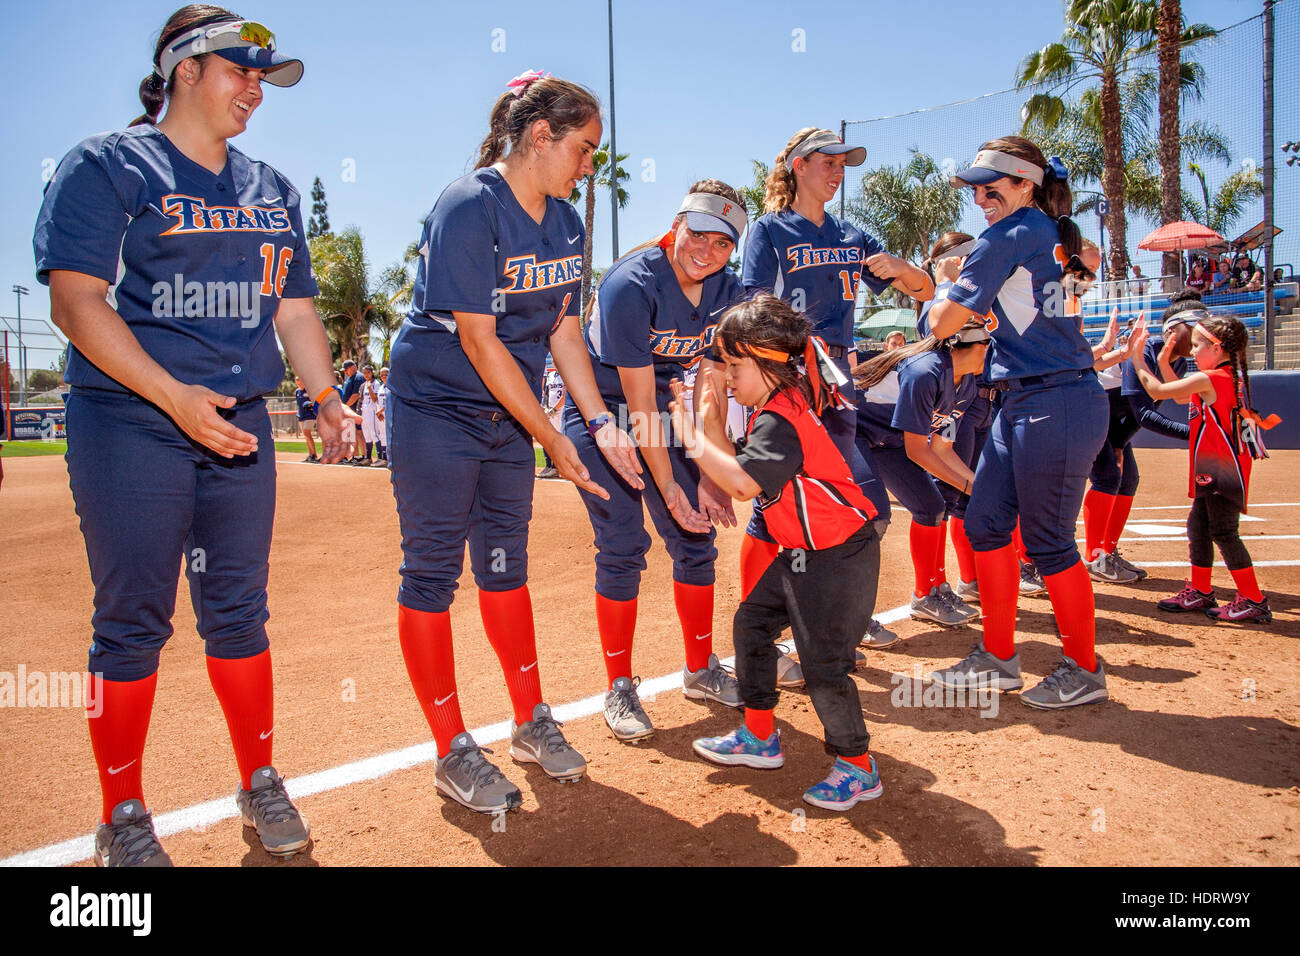 Multiracial college women's softball players trade hand slaps with a little girl admirer as they prepare for a game on the field in Fullerton, CA. Stock Photo